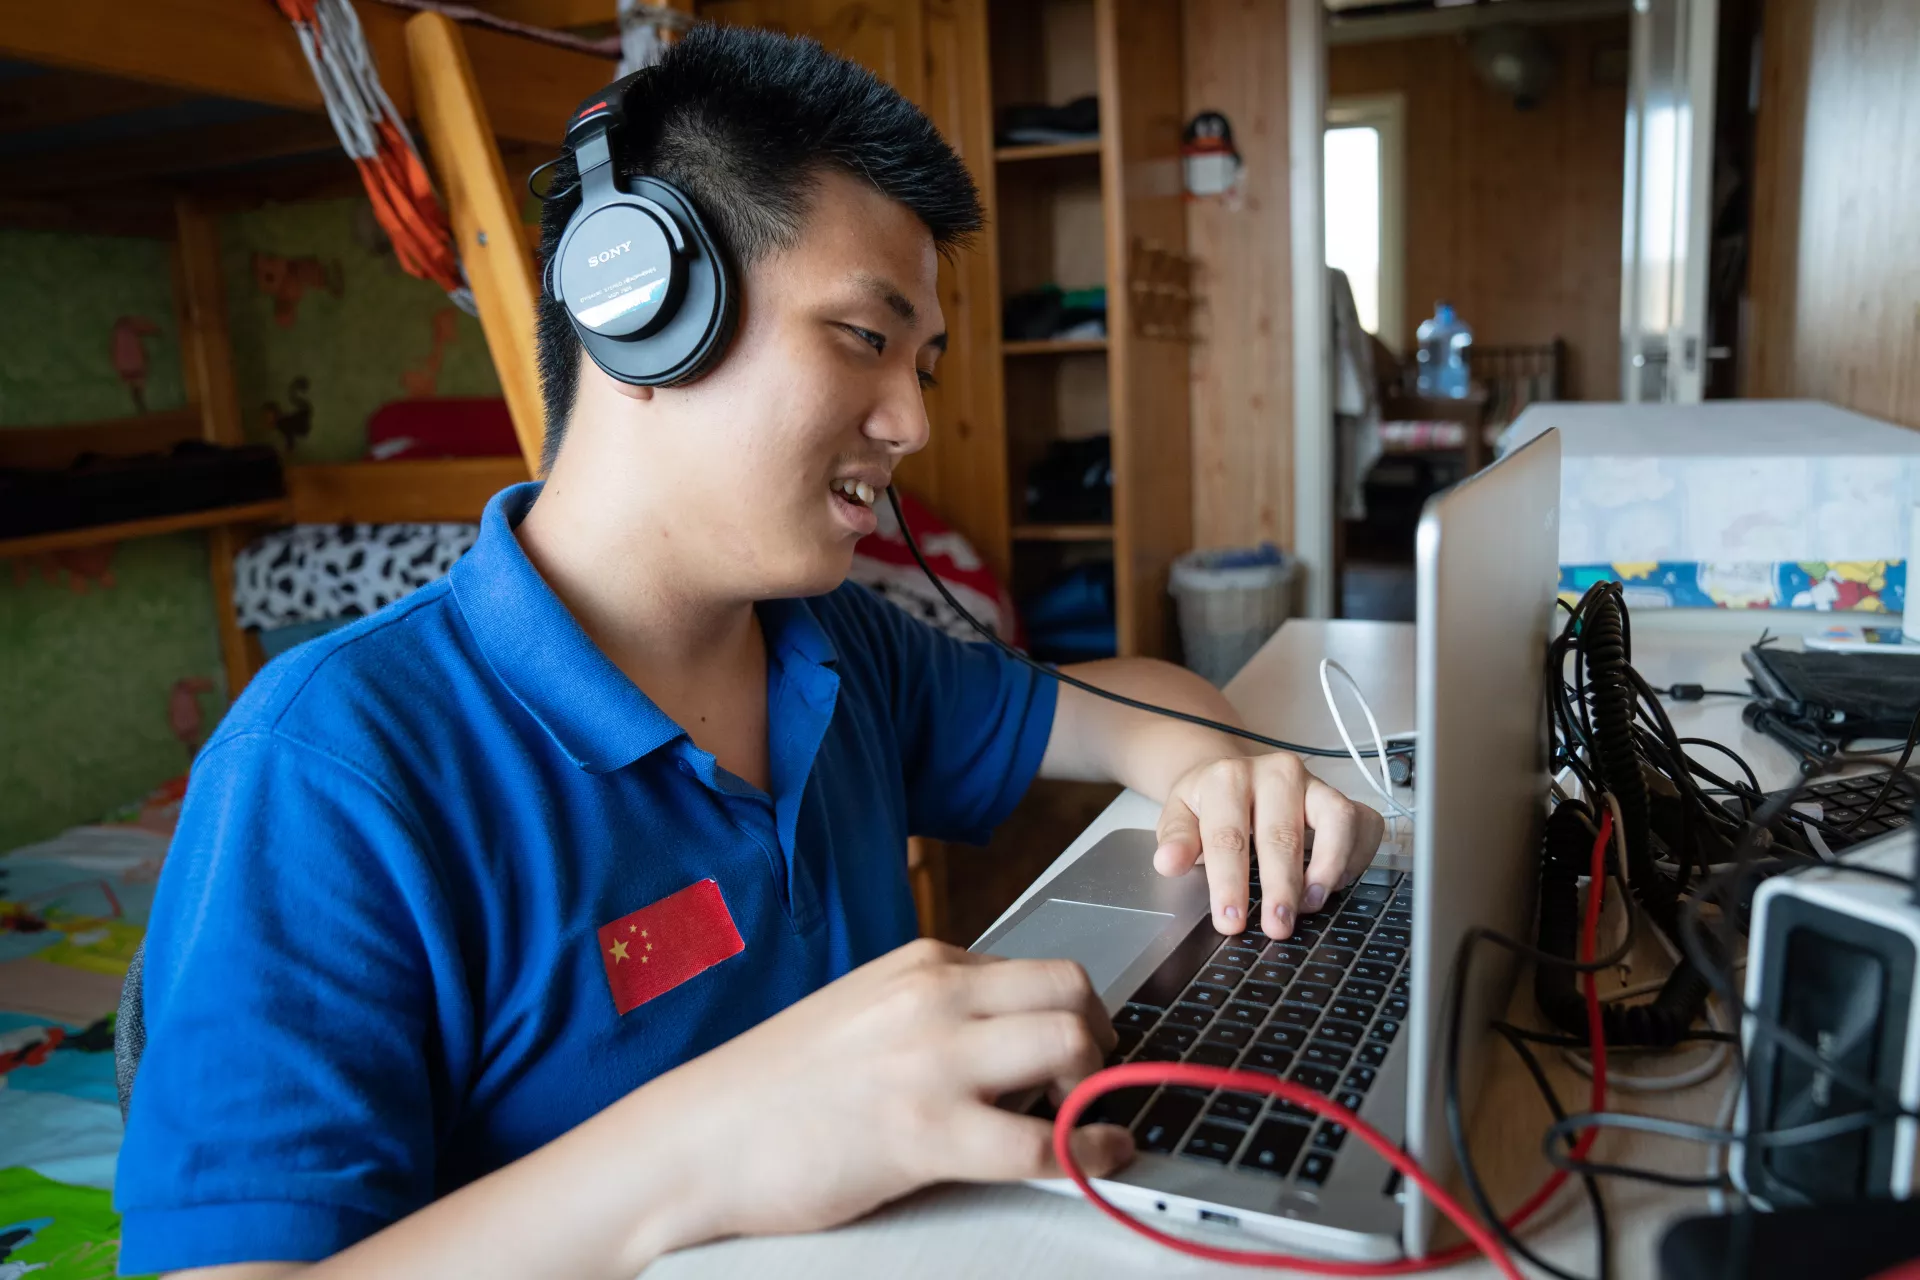 July 20, 2020, Zhao Chen was using computer at home.